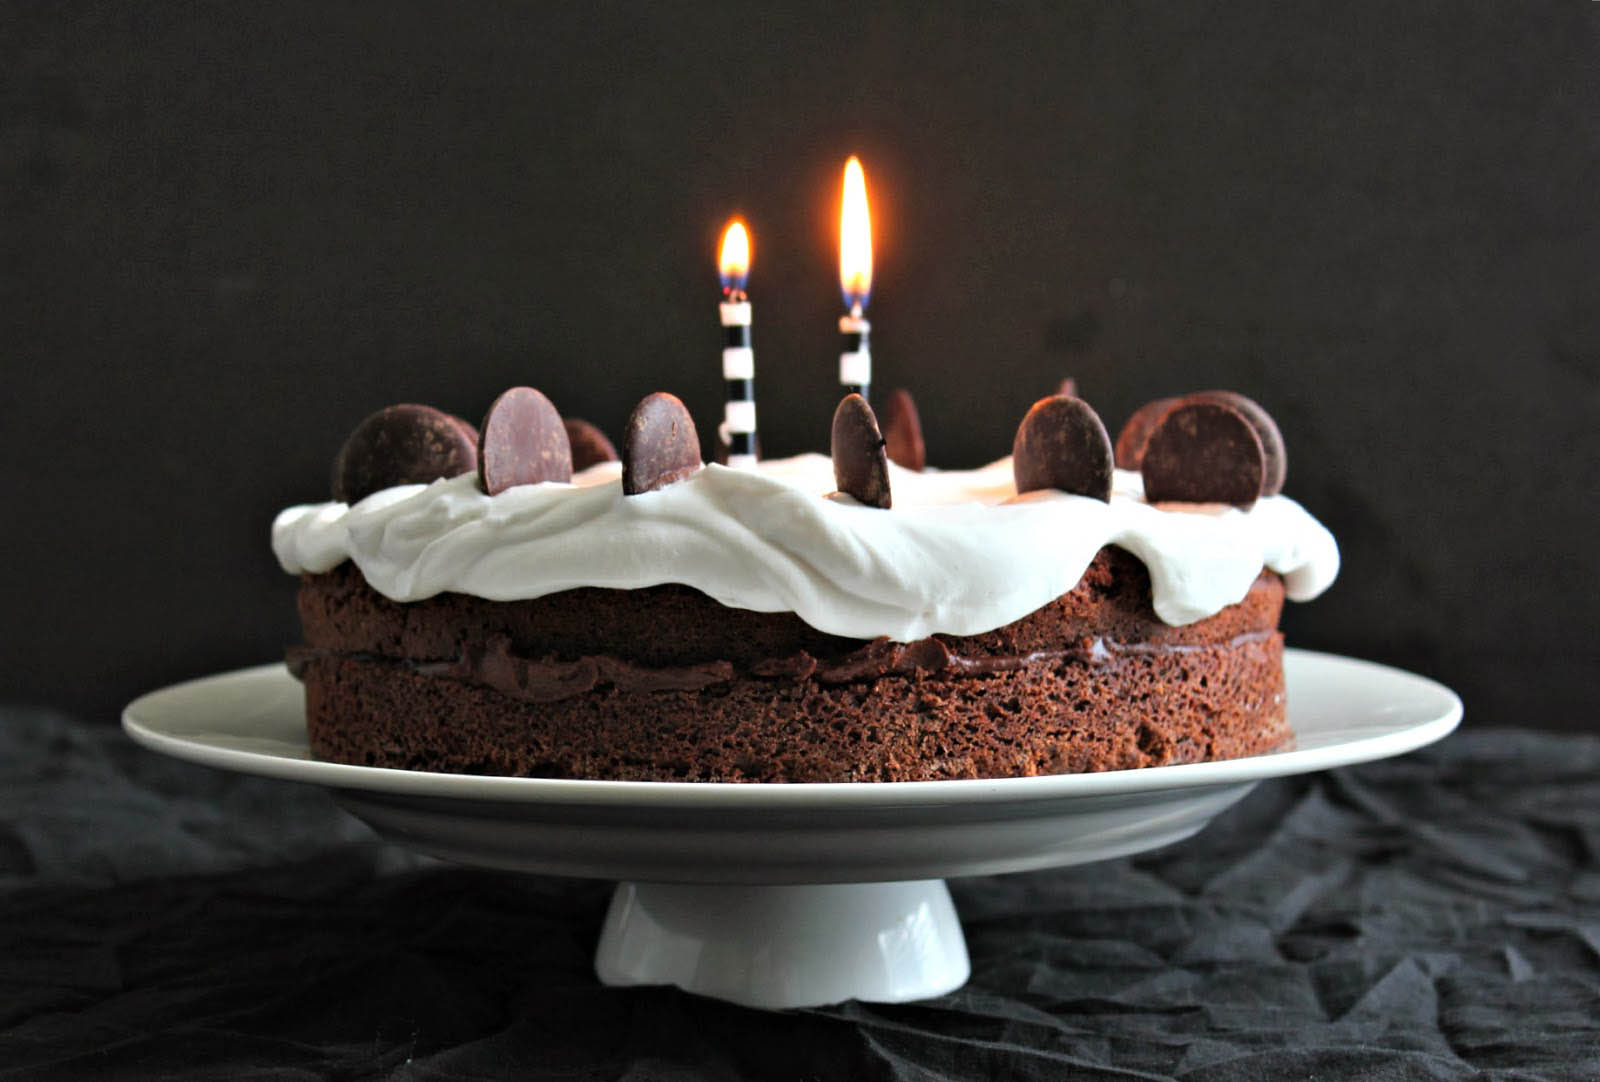 A Healthier Birthday Cake with Chocolate Fudge Filling